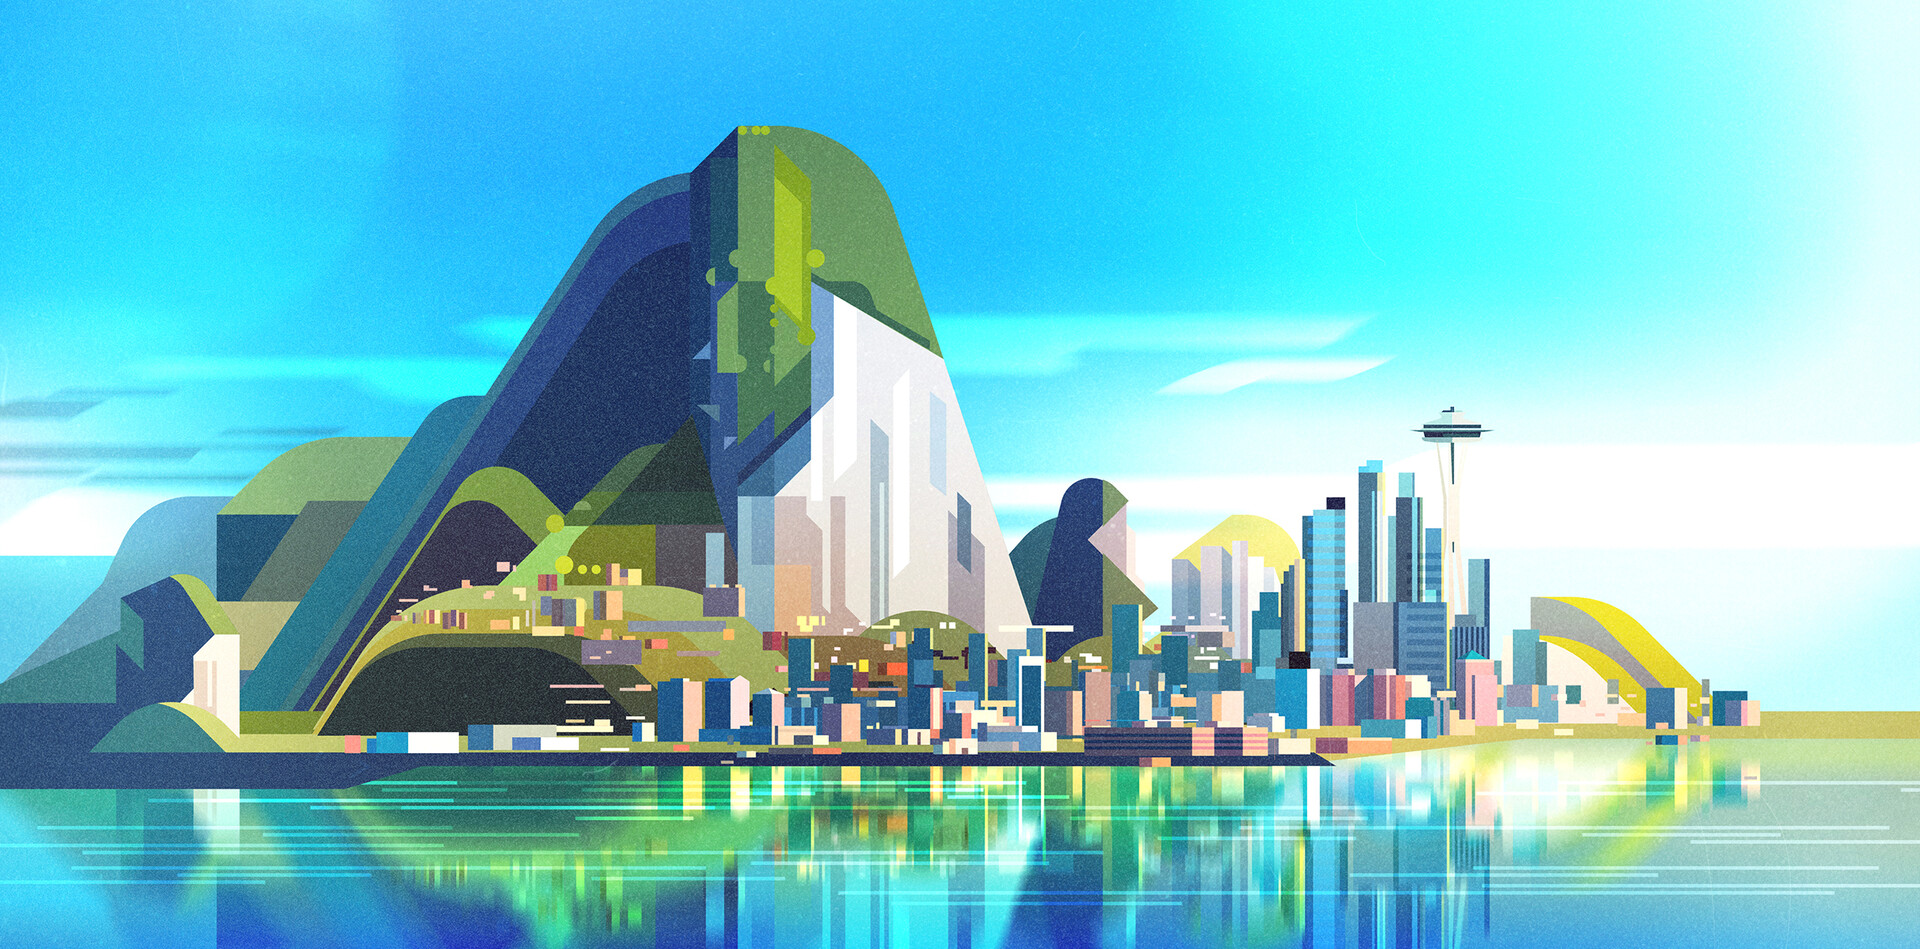 Mountains City Building Tower Water Reflection Clouds Sky James Gilleard 1920x949